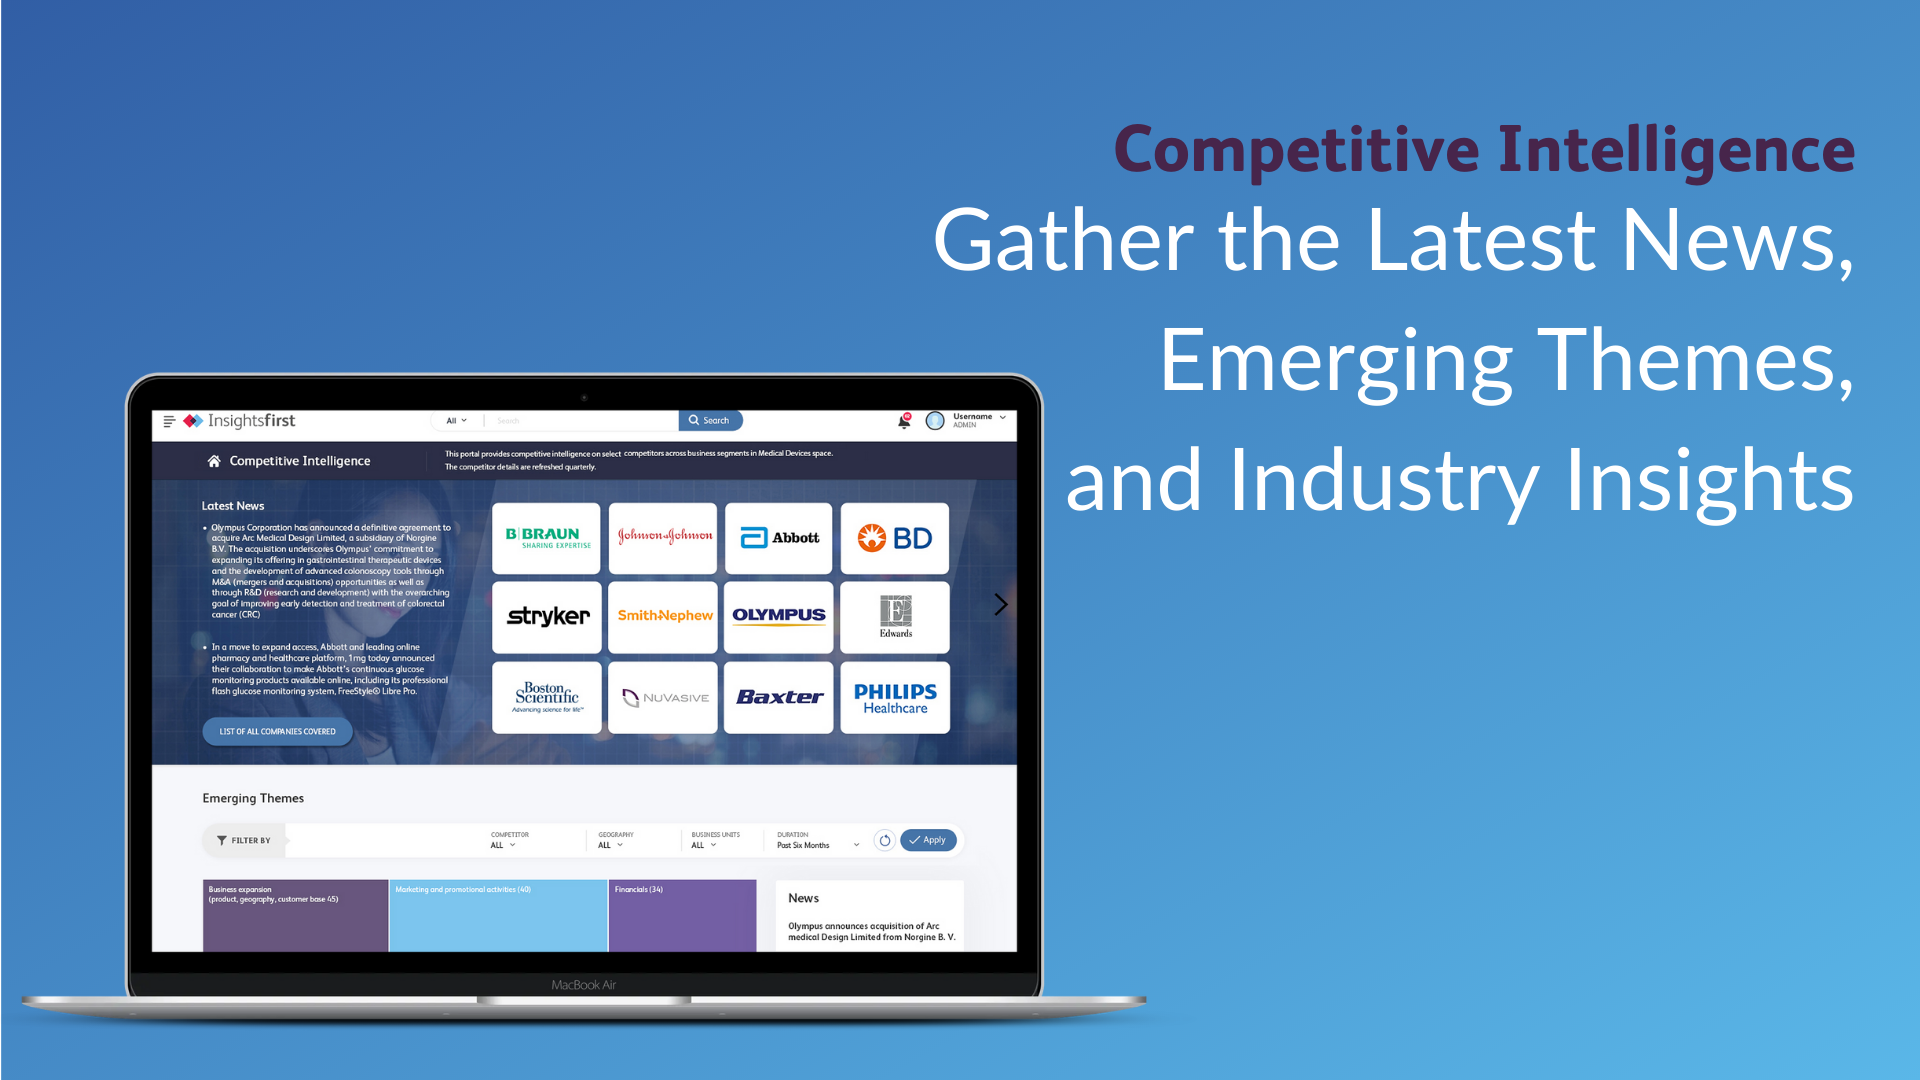 Competitive Intelligence: Gather the Latest News, Emerging Trends, and Industry Insights